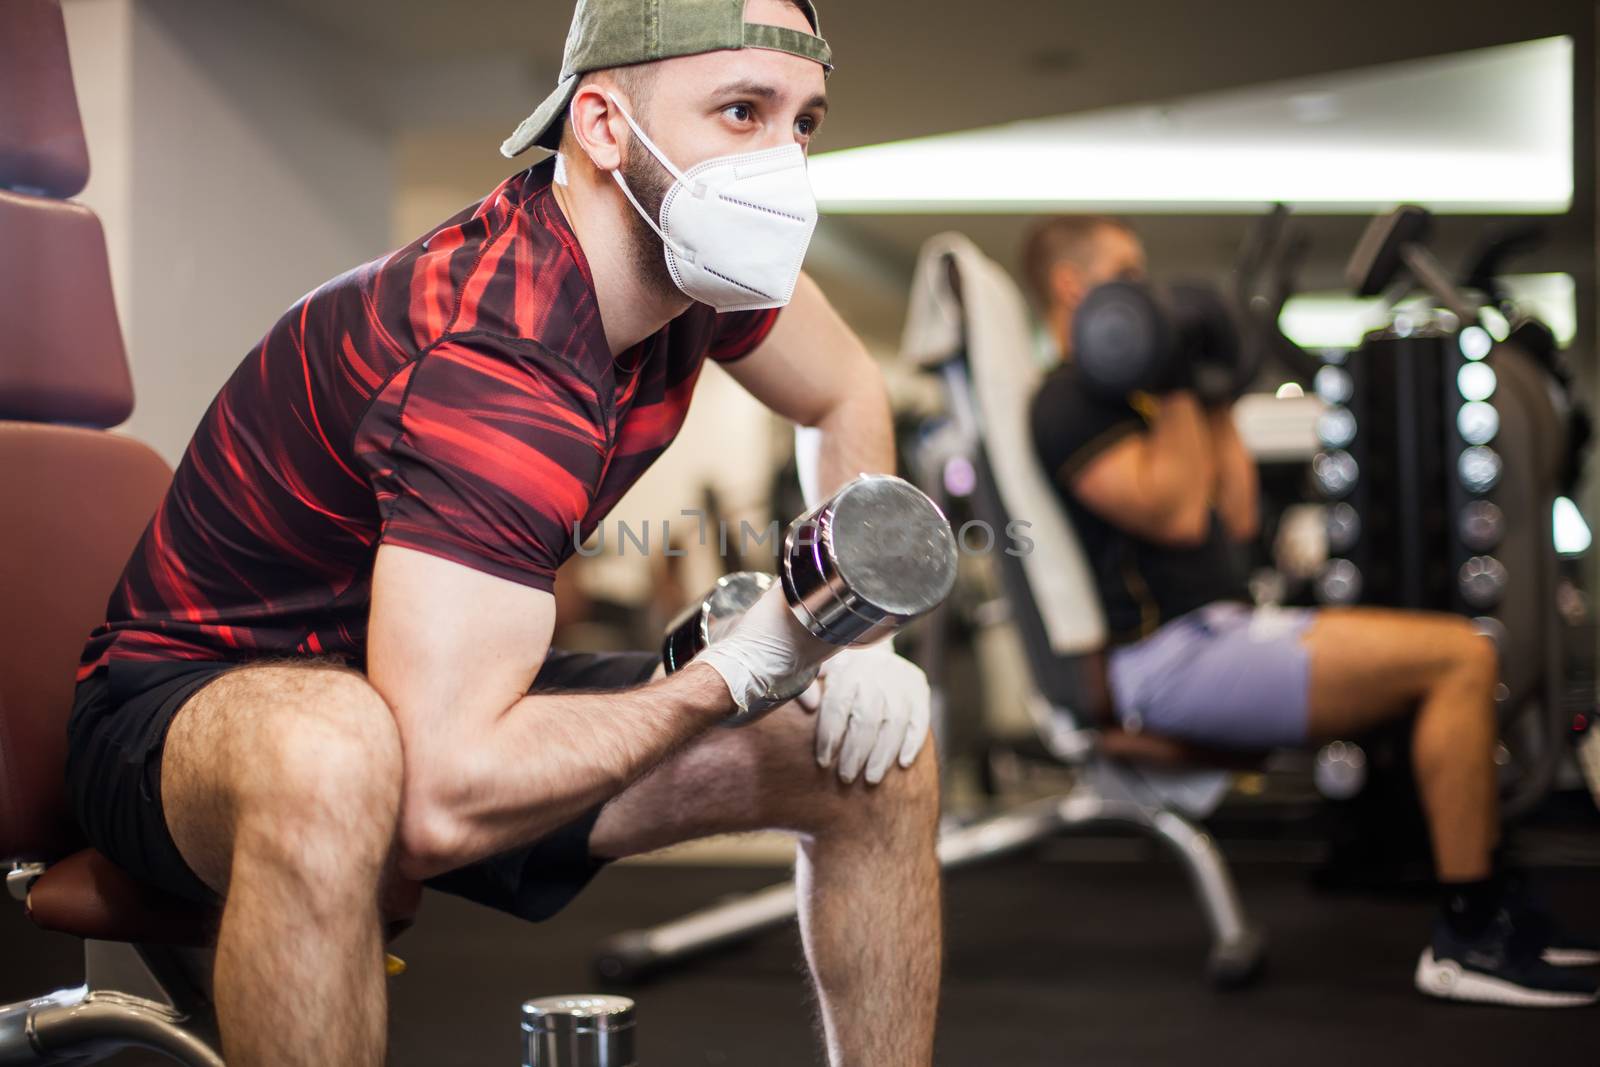 Young men working out wearing face mask & latex rubber gloves,performing bicep curl with dumbbells,COVID-19 pandemic social distancing rules while working out in reopened indoor gym,prevent & protect